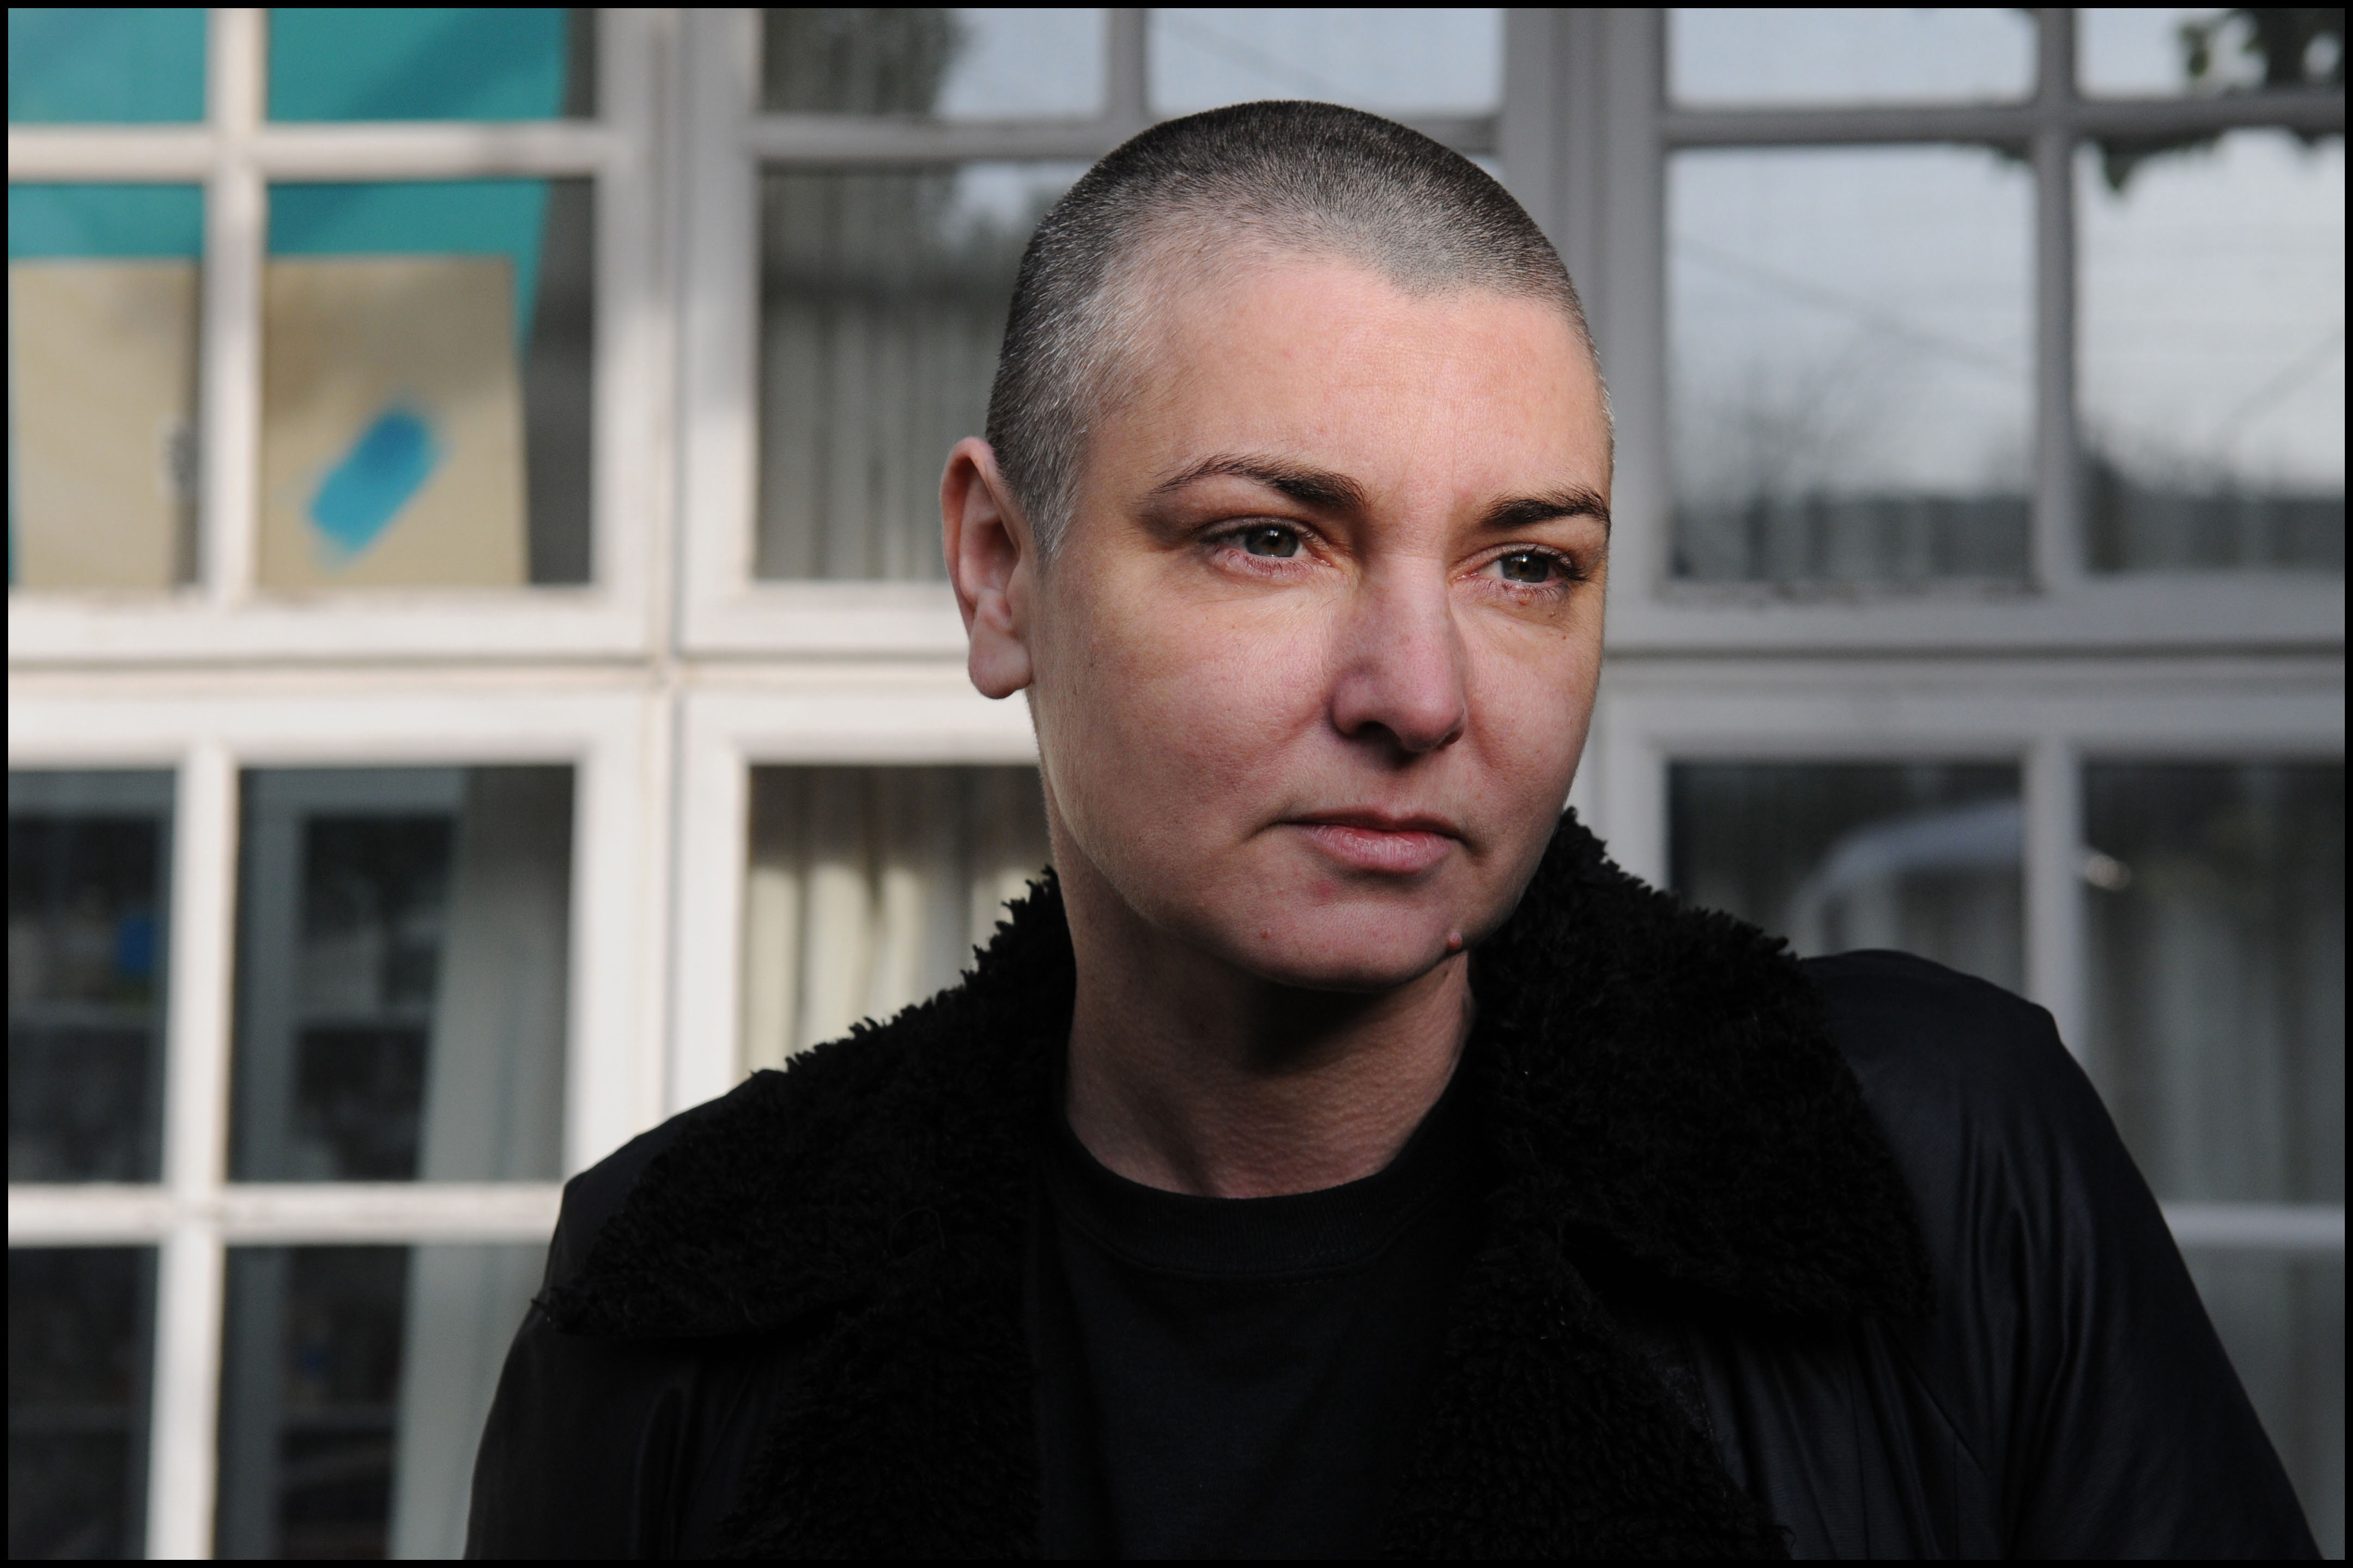 Sinead O'Connor poses at her home on February 3, 2012, in County Wicklow, Republic Of Ireland. | Source: Getty Images